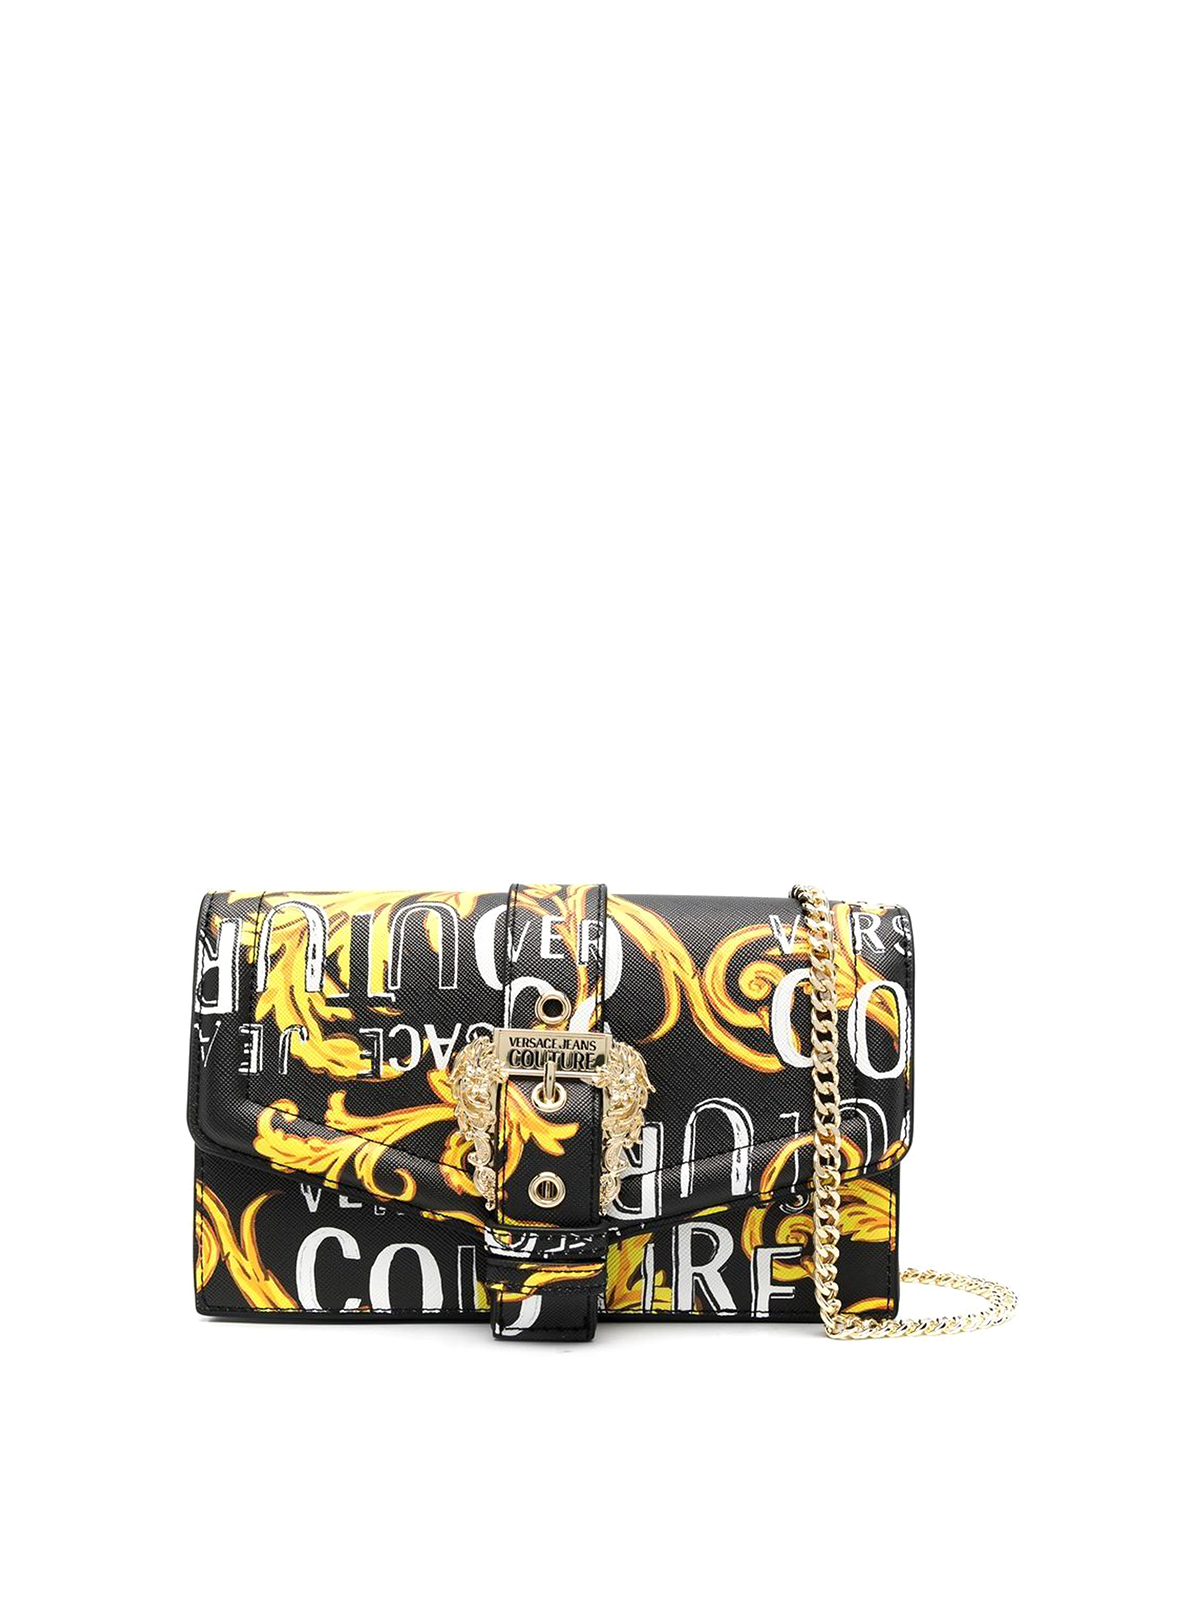 Versace Jeans Couture Crossbody Saddle Bag